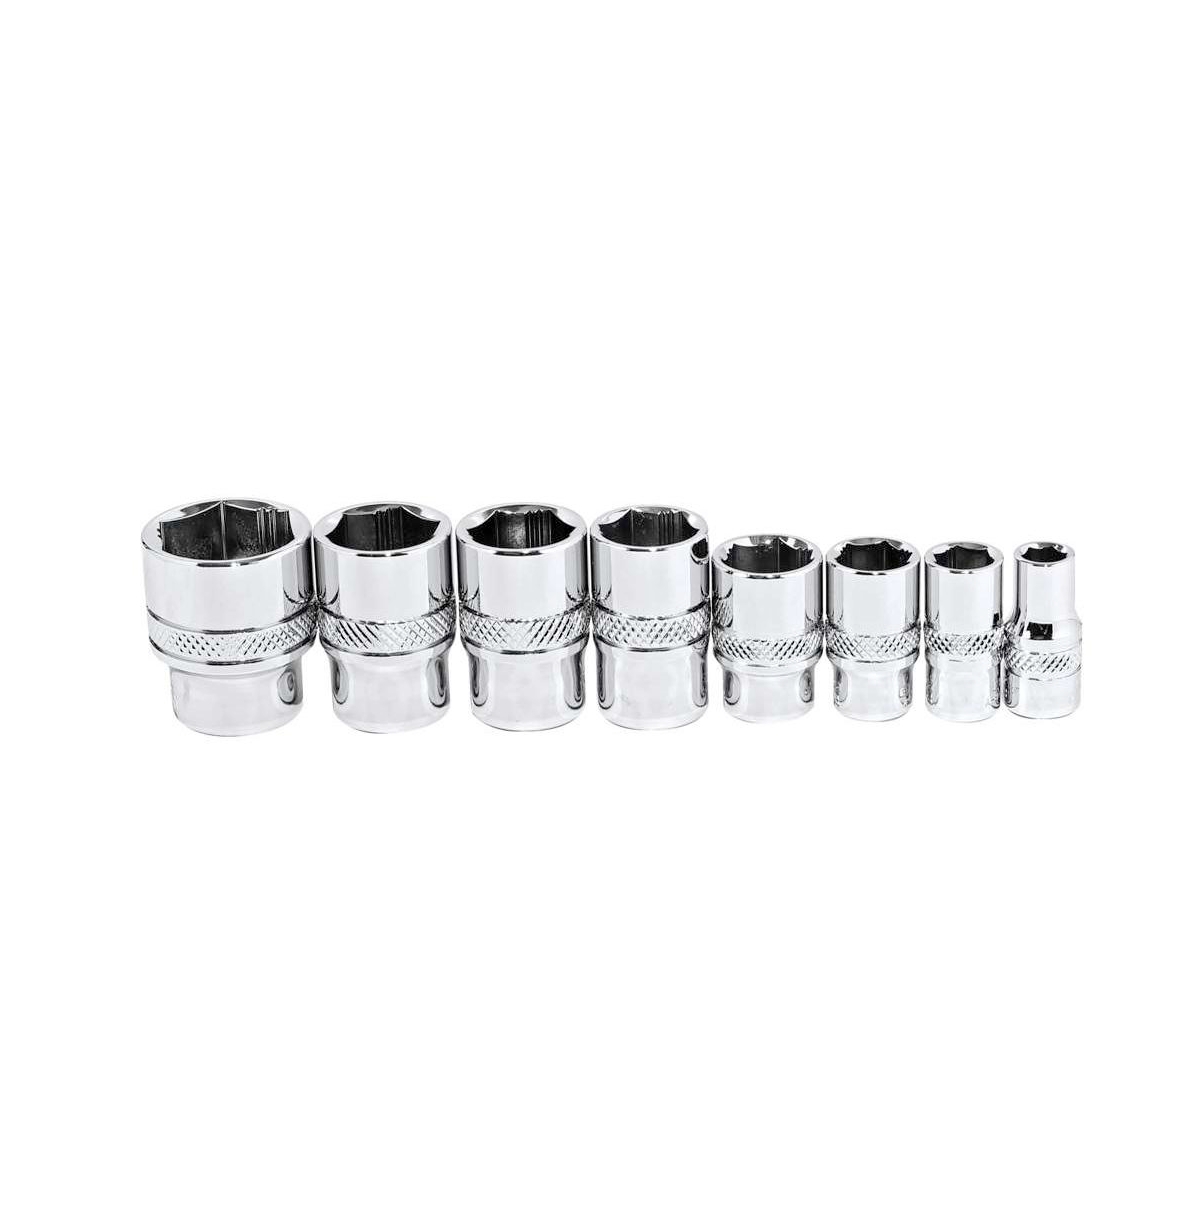 8 Piece Zeon Metric Socket Set for Damaged Bolts - Silver